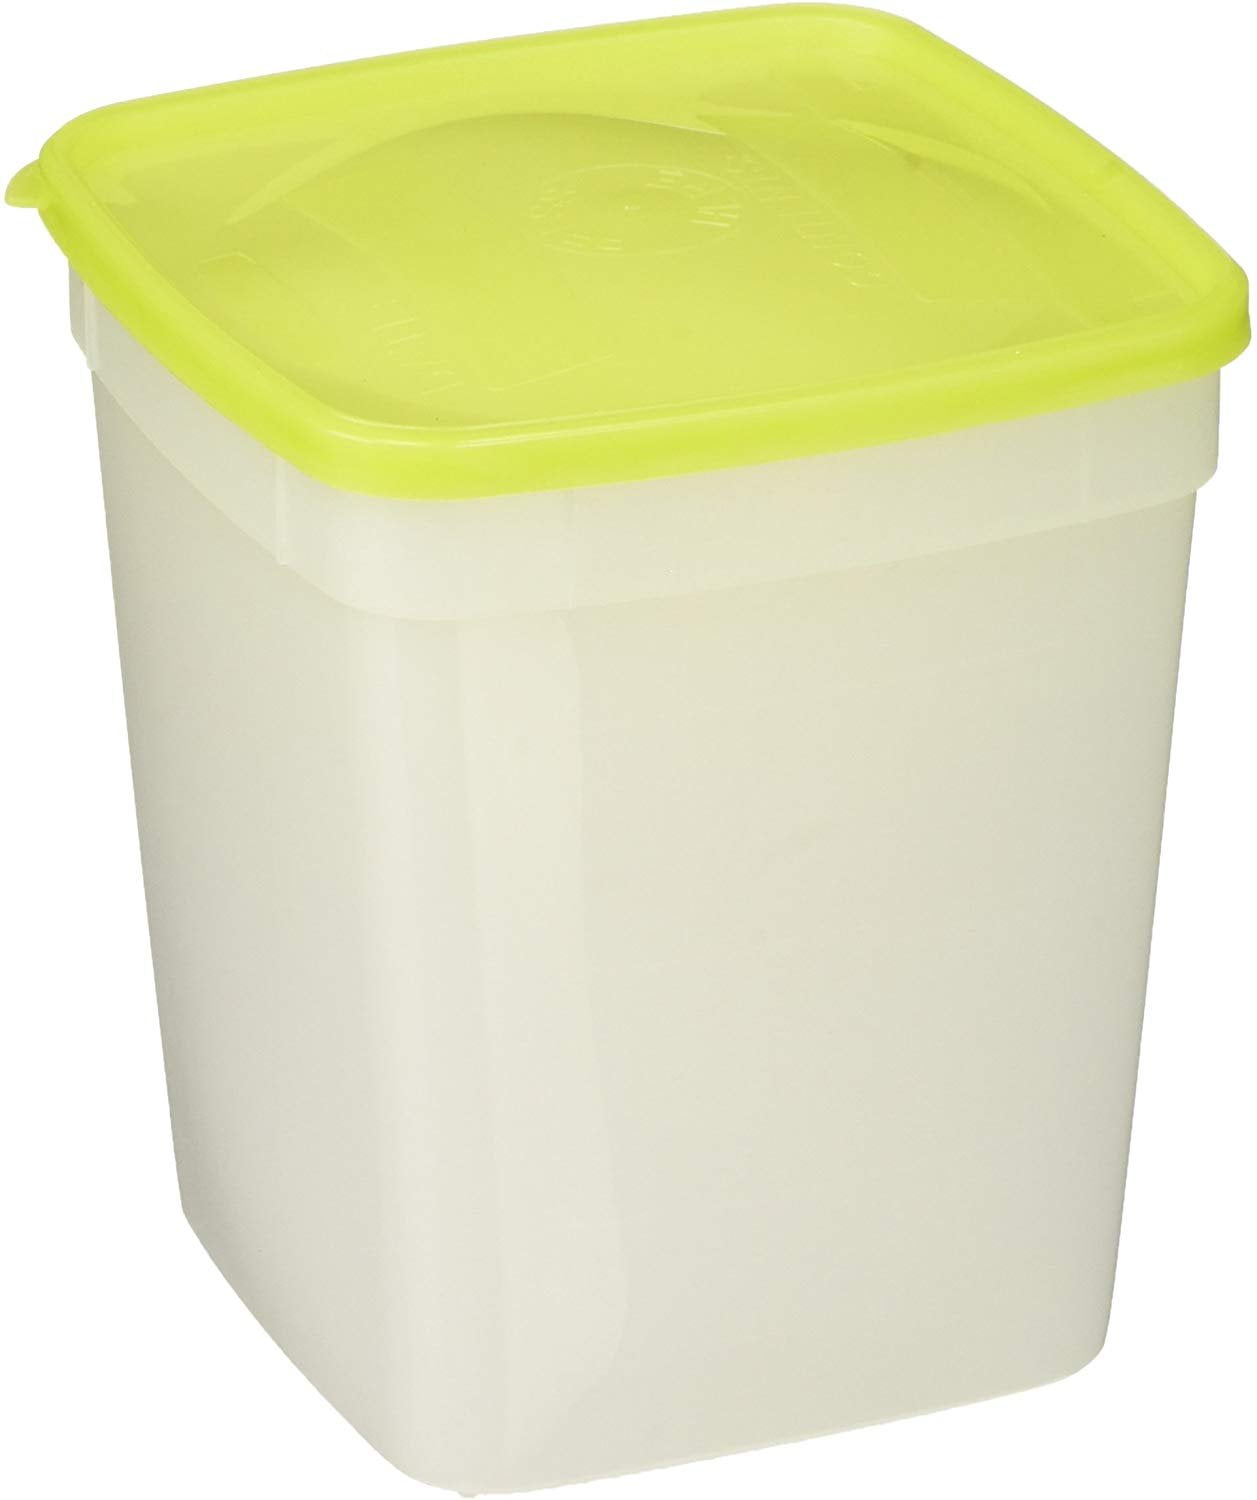 Cox Hardware and Lumber - Square 1 Quart Freezer Food Storage Container  with Lids, 3 Pk